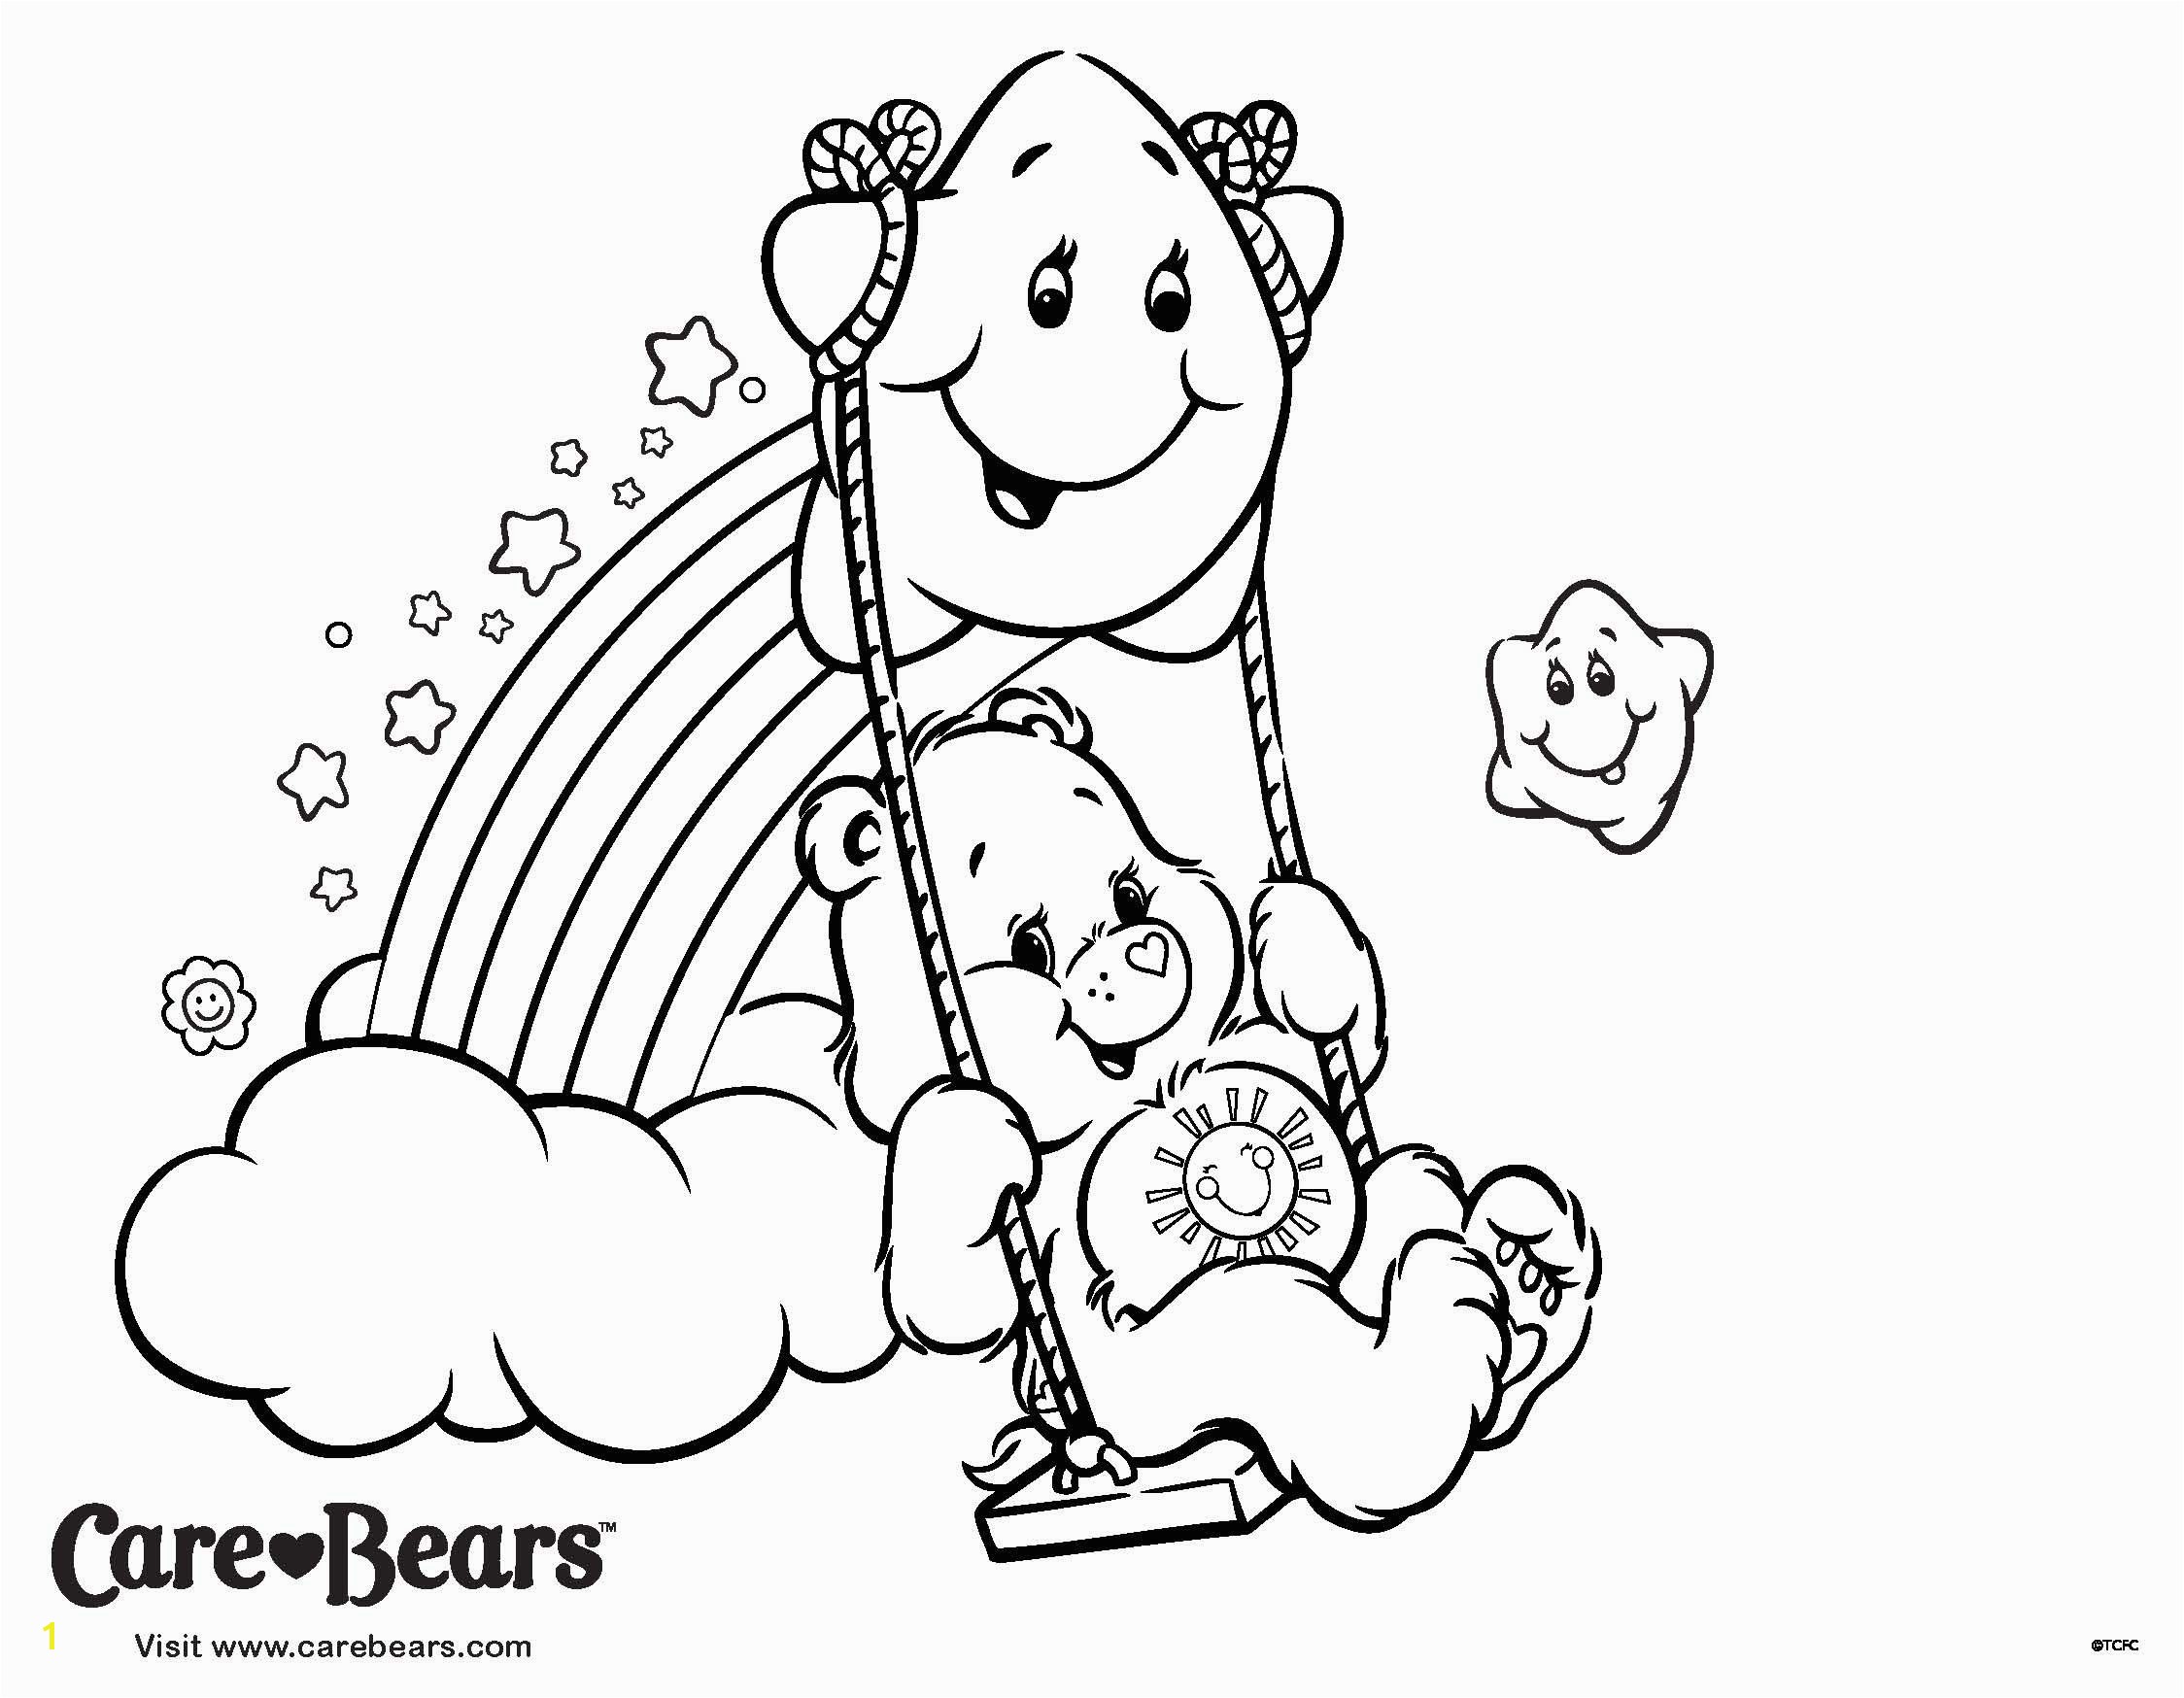 Funshine Care Bear Coloring Pages Color In some Fun with This Funshine Bear Coloring Page From